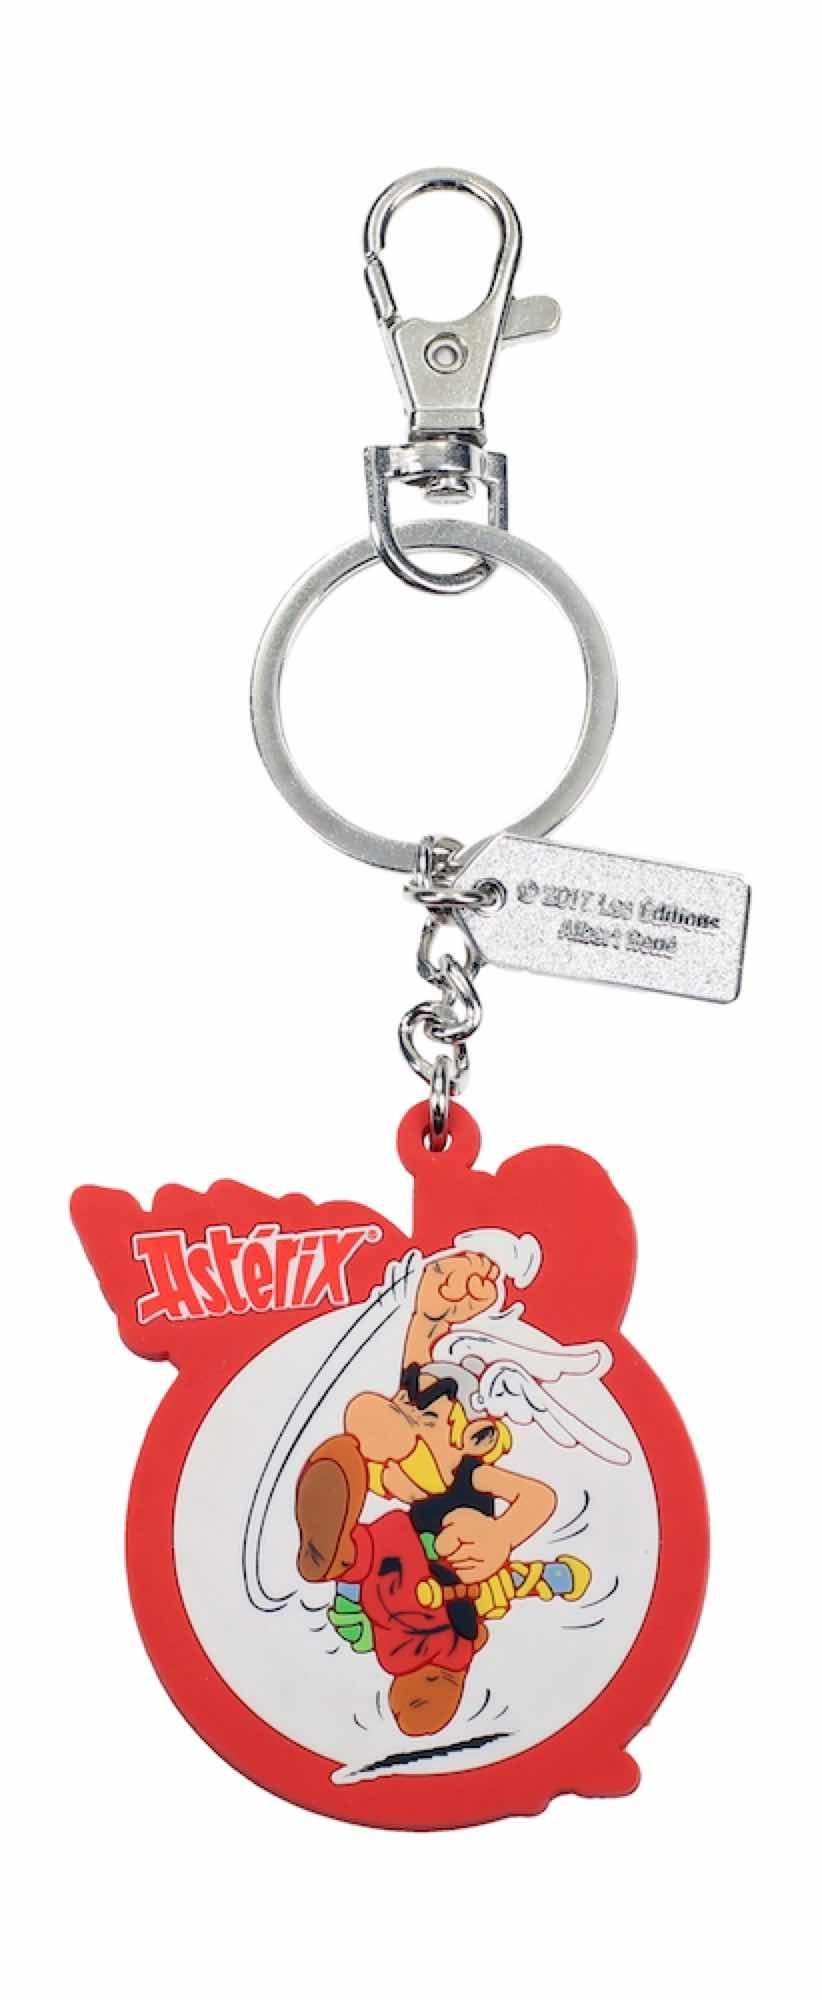 ASTERIX - Asterix Pafff - Reversible Rubber Keychain "10x20x2cm"